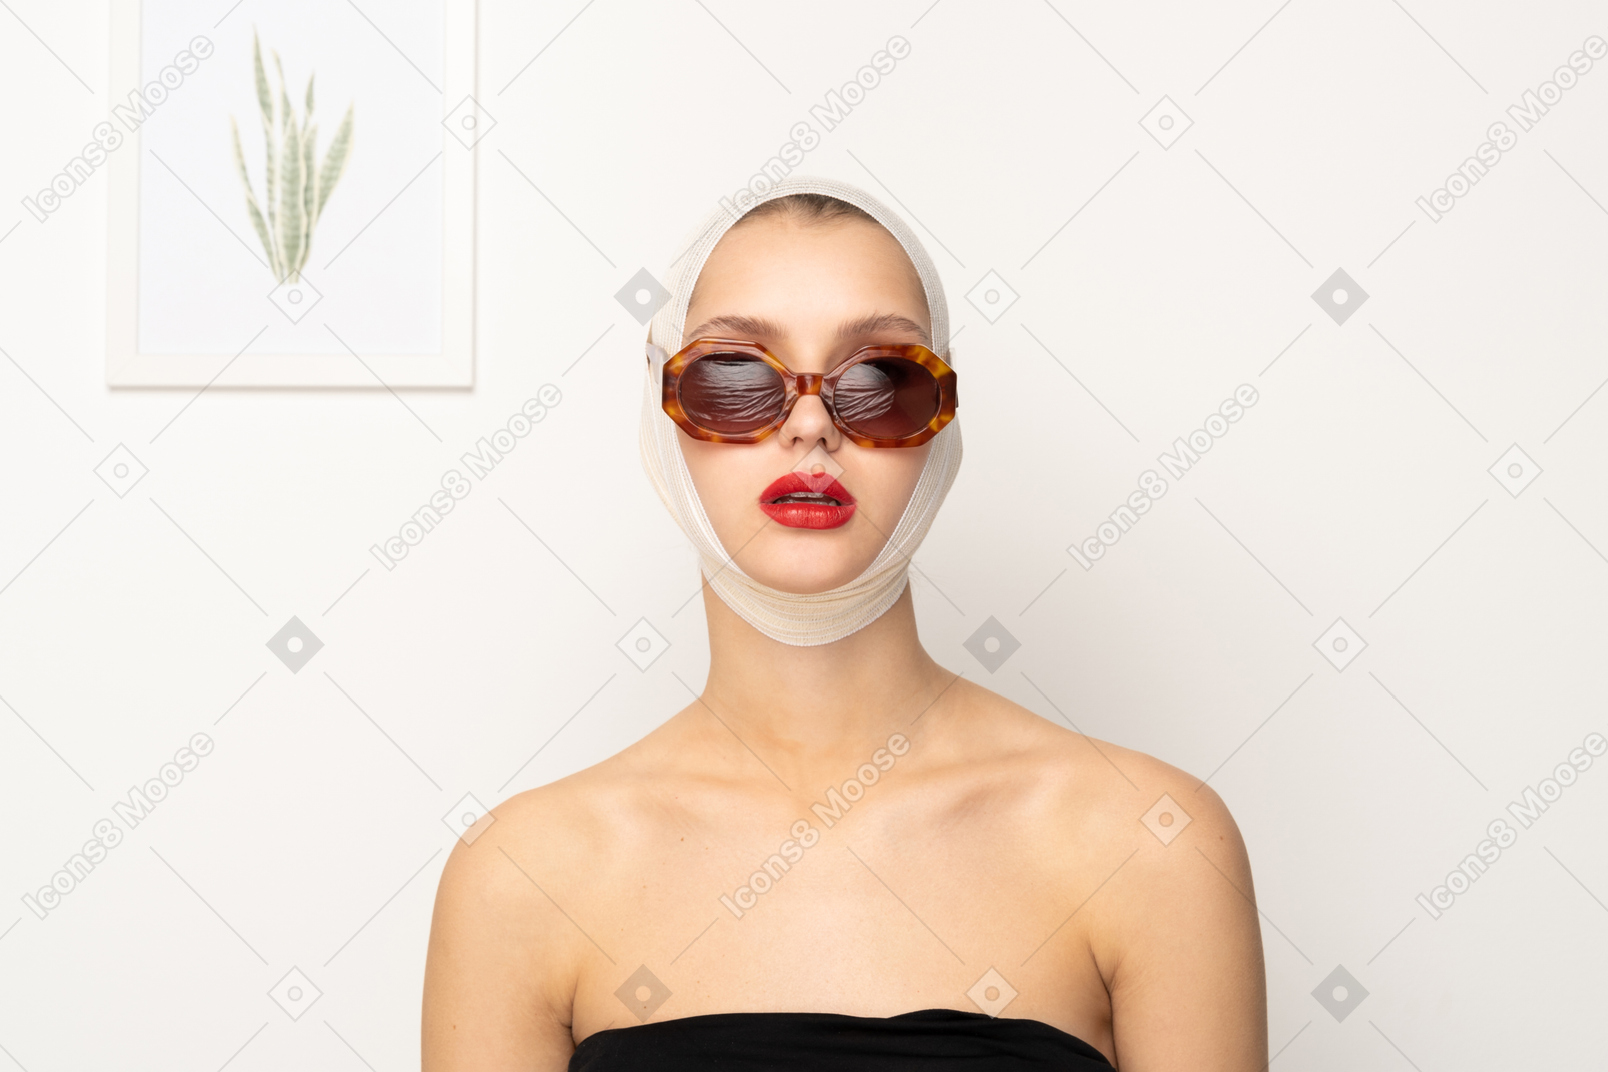 Young woman with head bandage wearing sunglasses